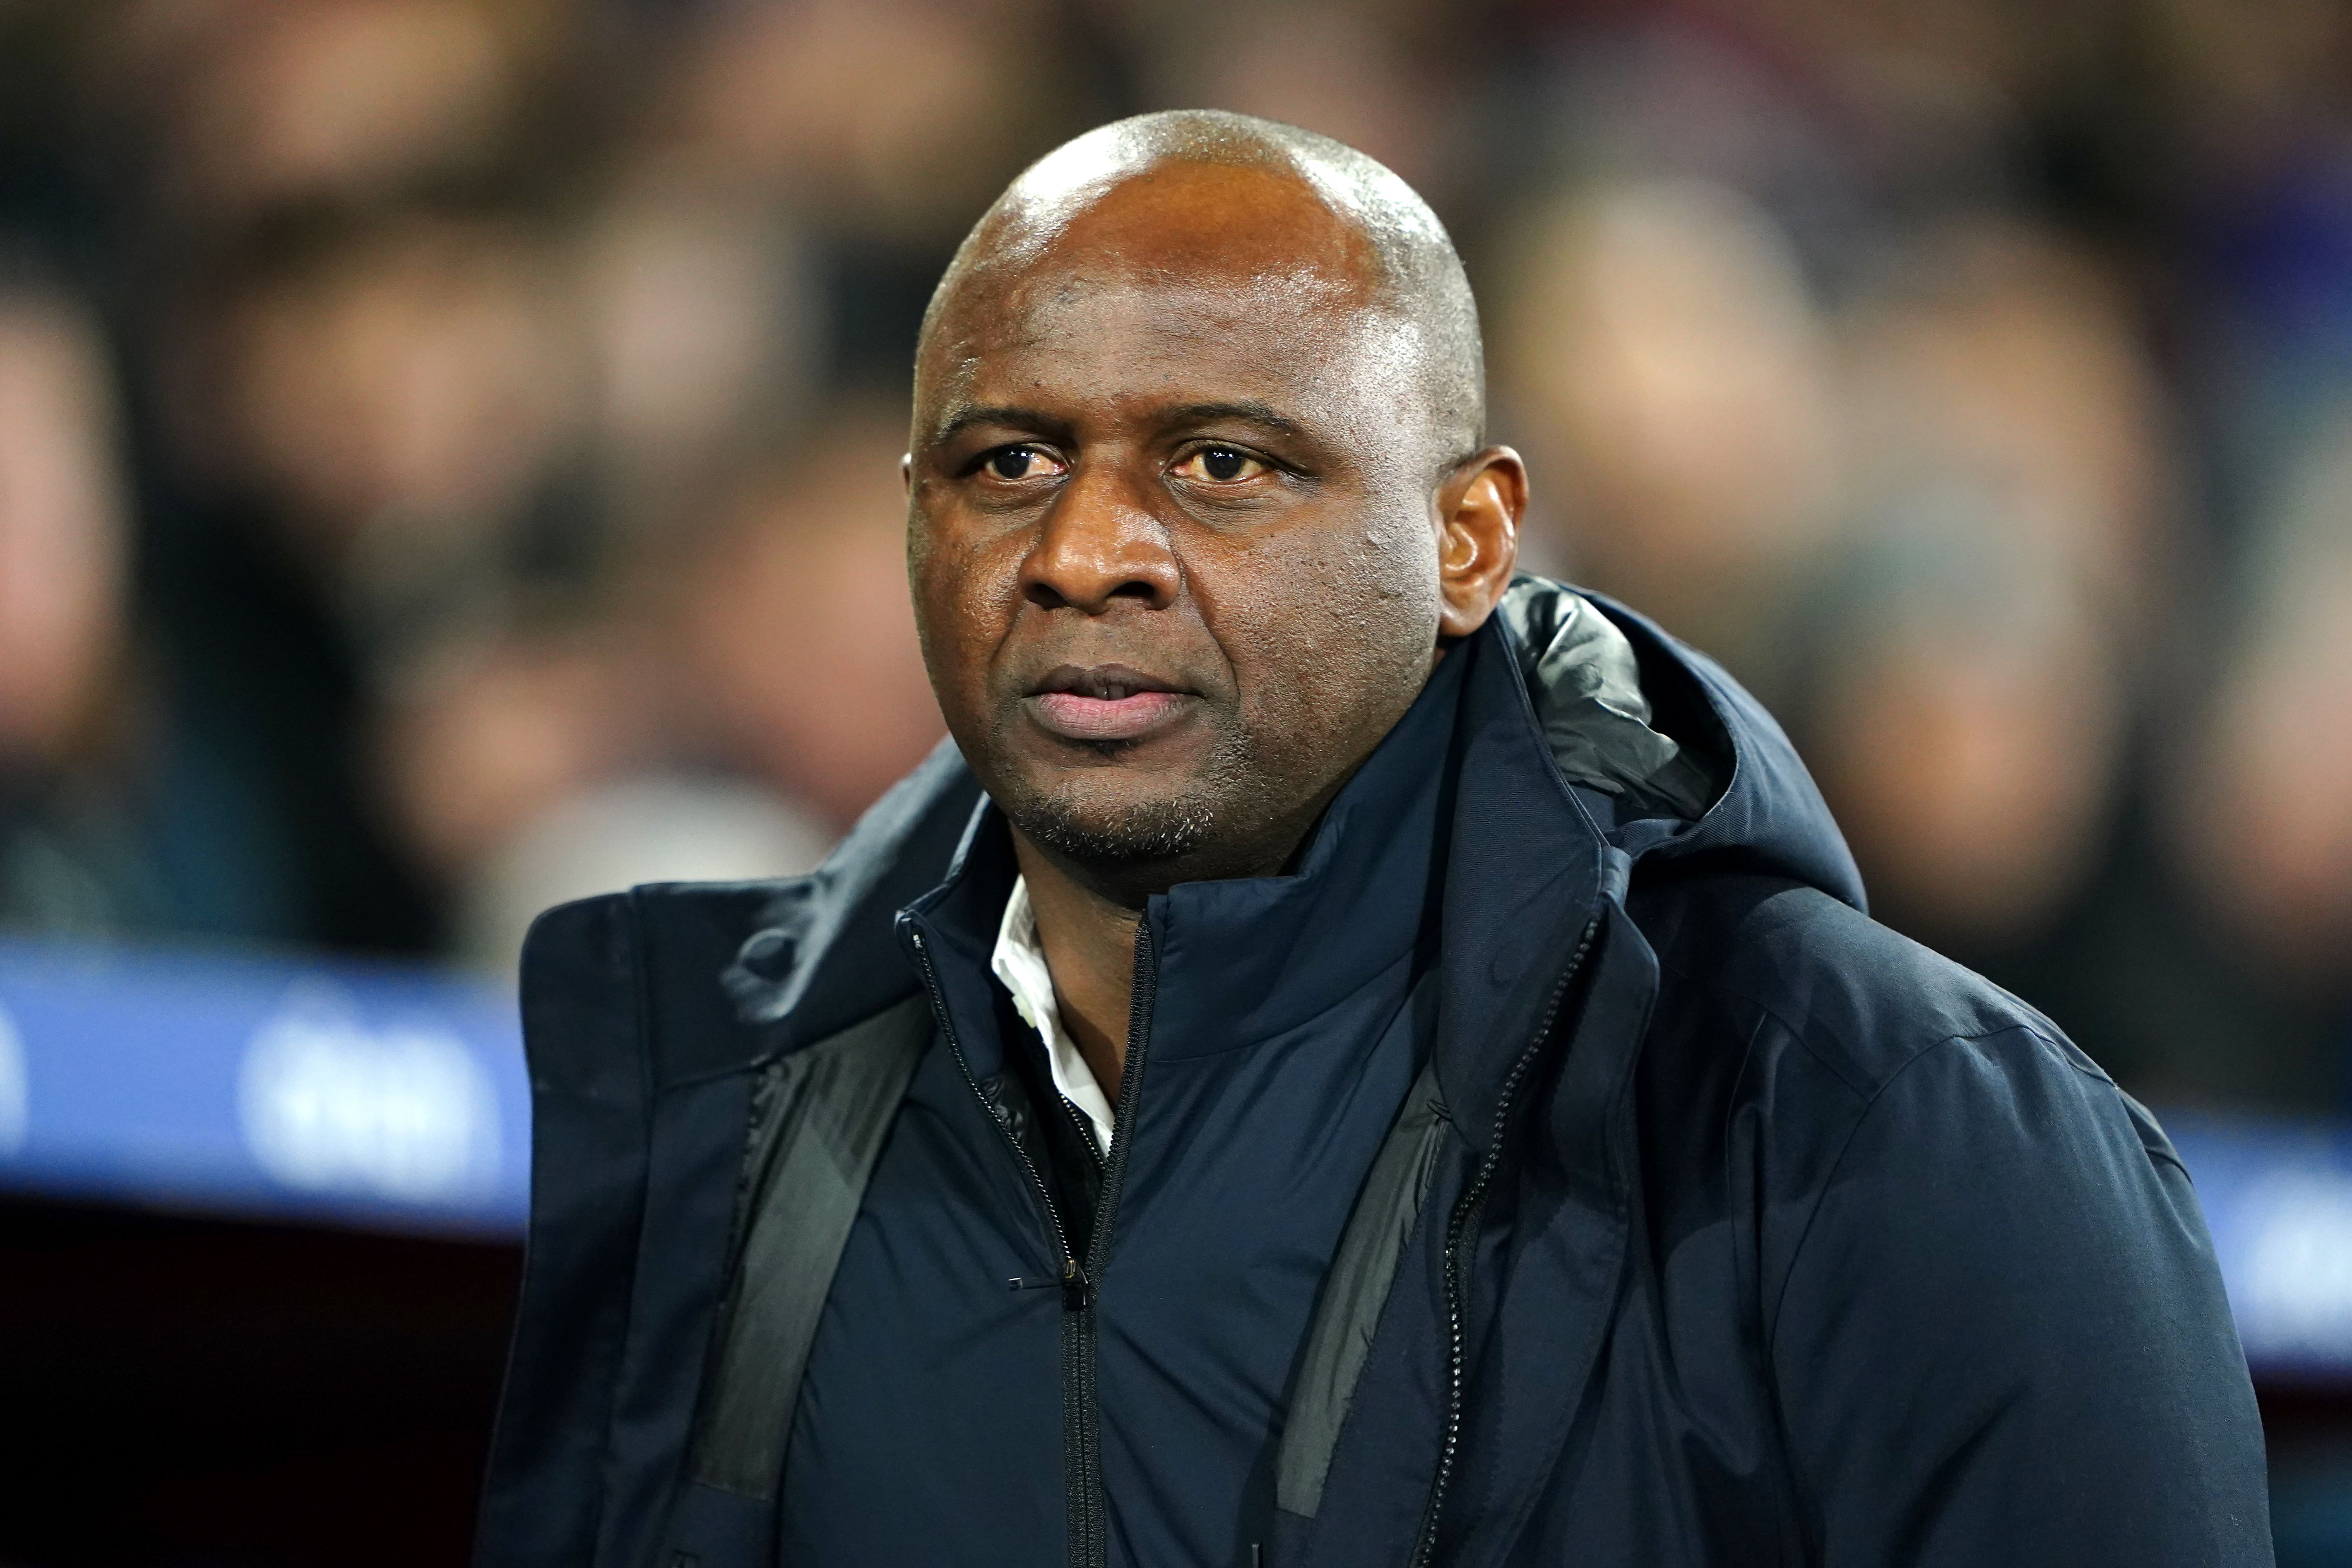 Liverpool will ‘want to bounce back’ against Crystal Palace, warns Patrick Vieira